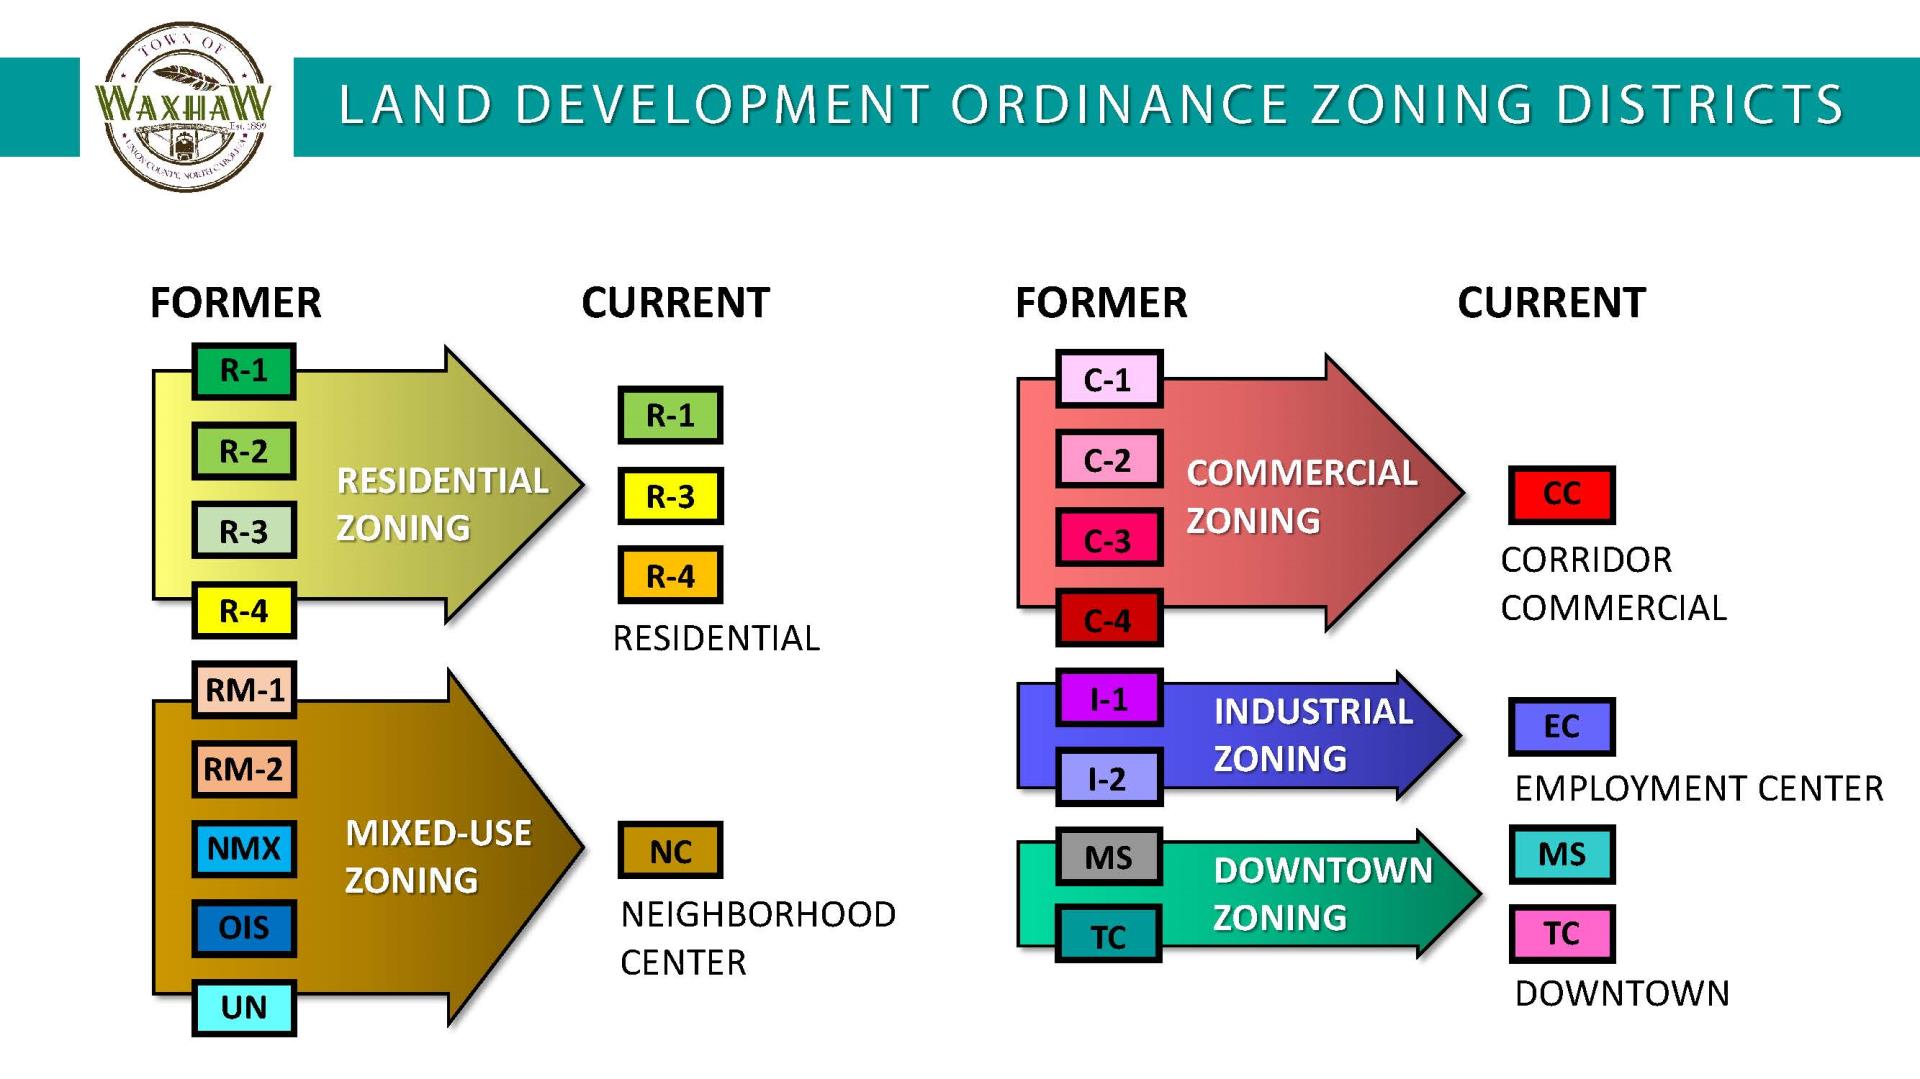 LDC ZONING DISTRICTS board - UPDATE